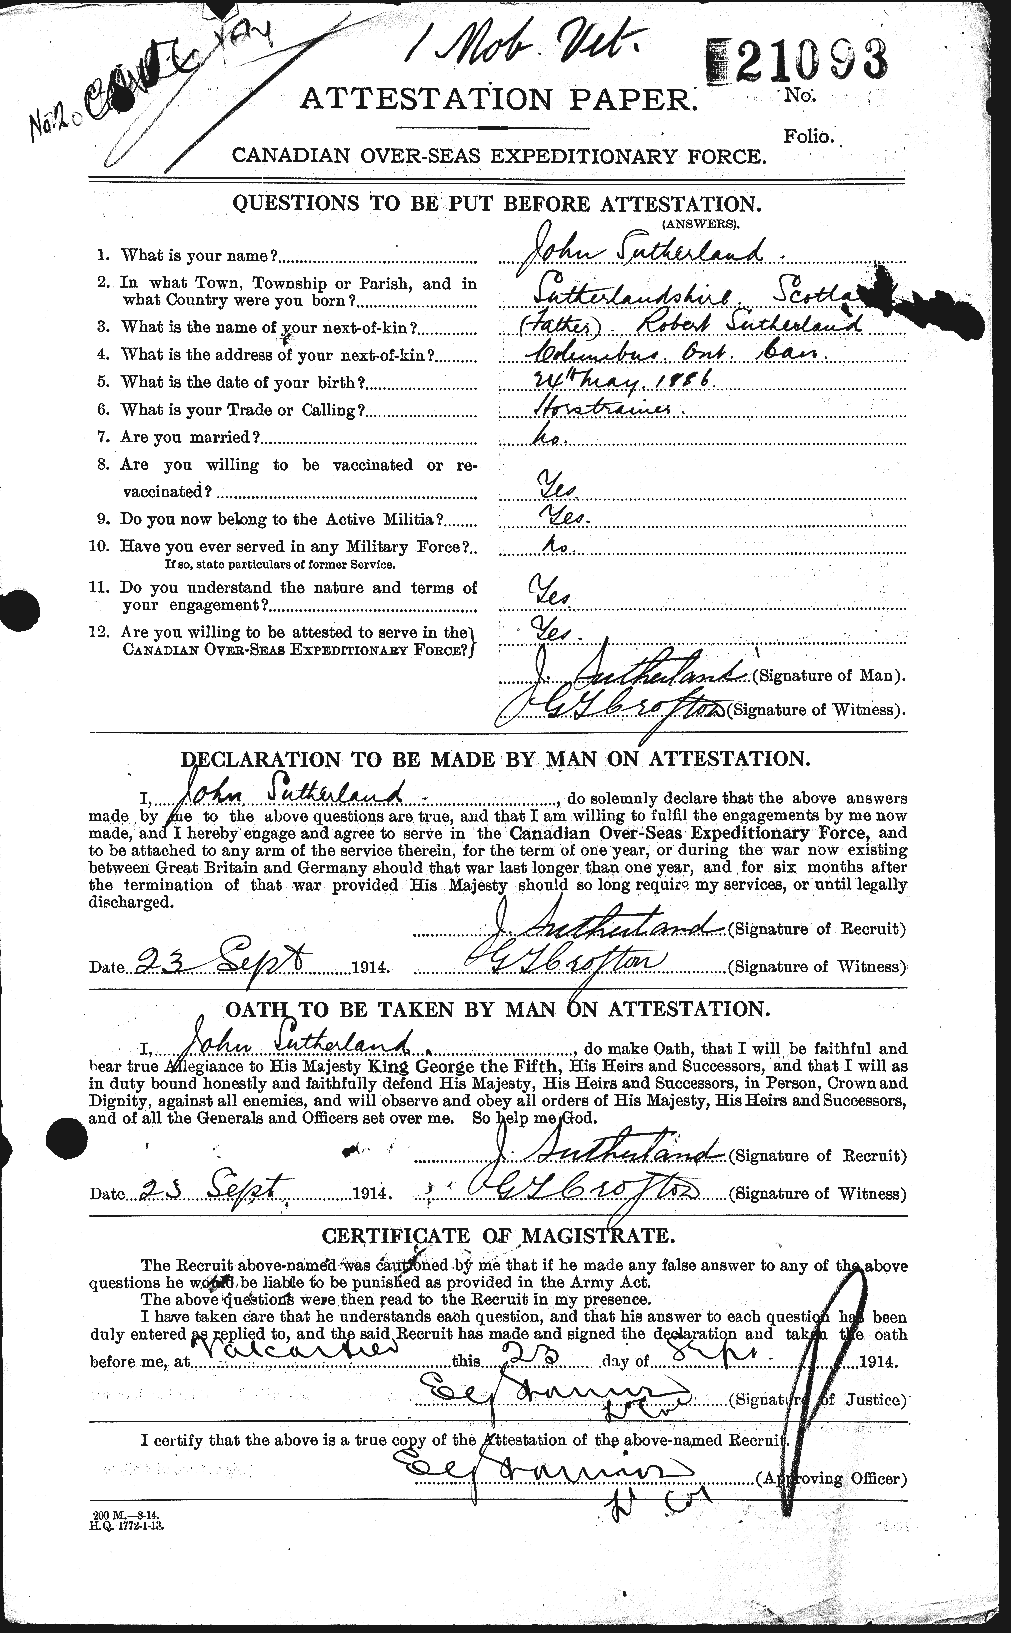 Personnel Records of the First World War - CEF 124723a